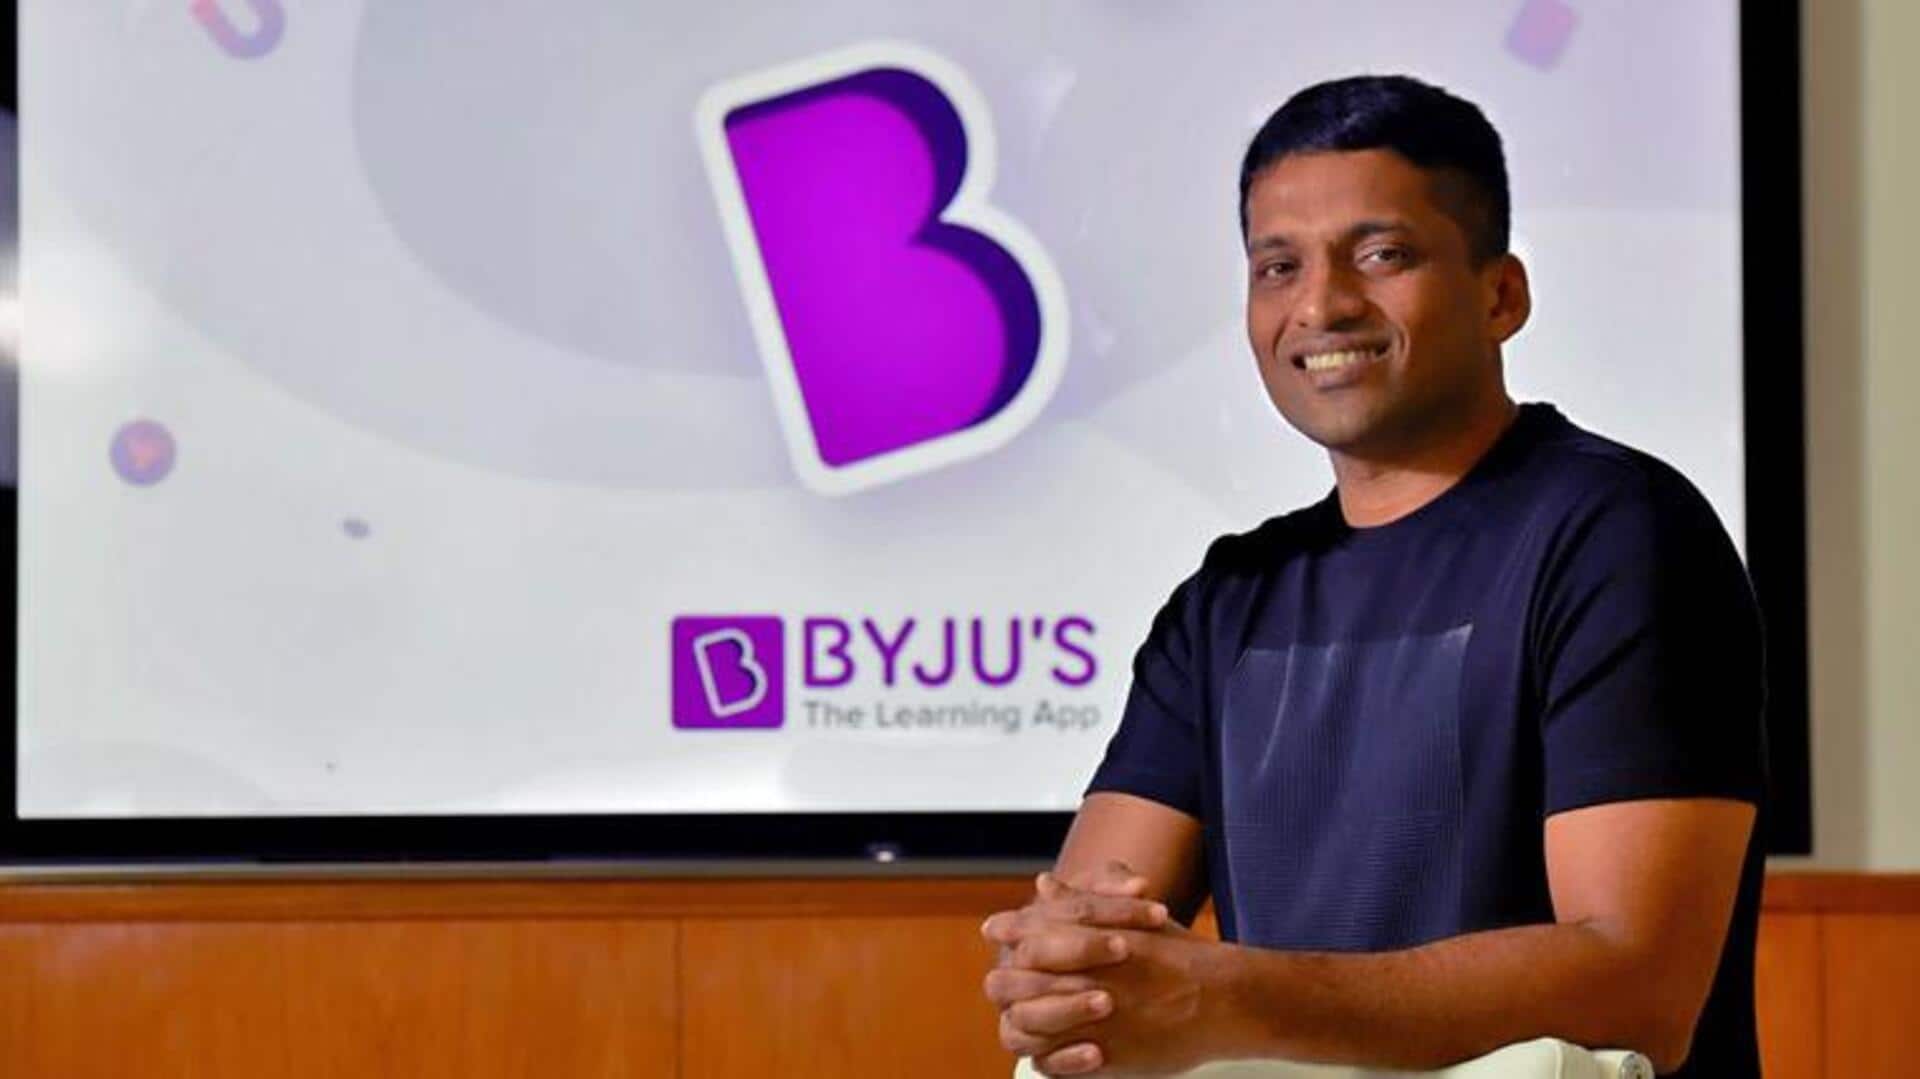 BYJU'S slashes valuation by 99% in desperate funding bid